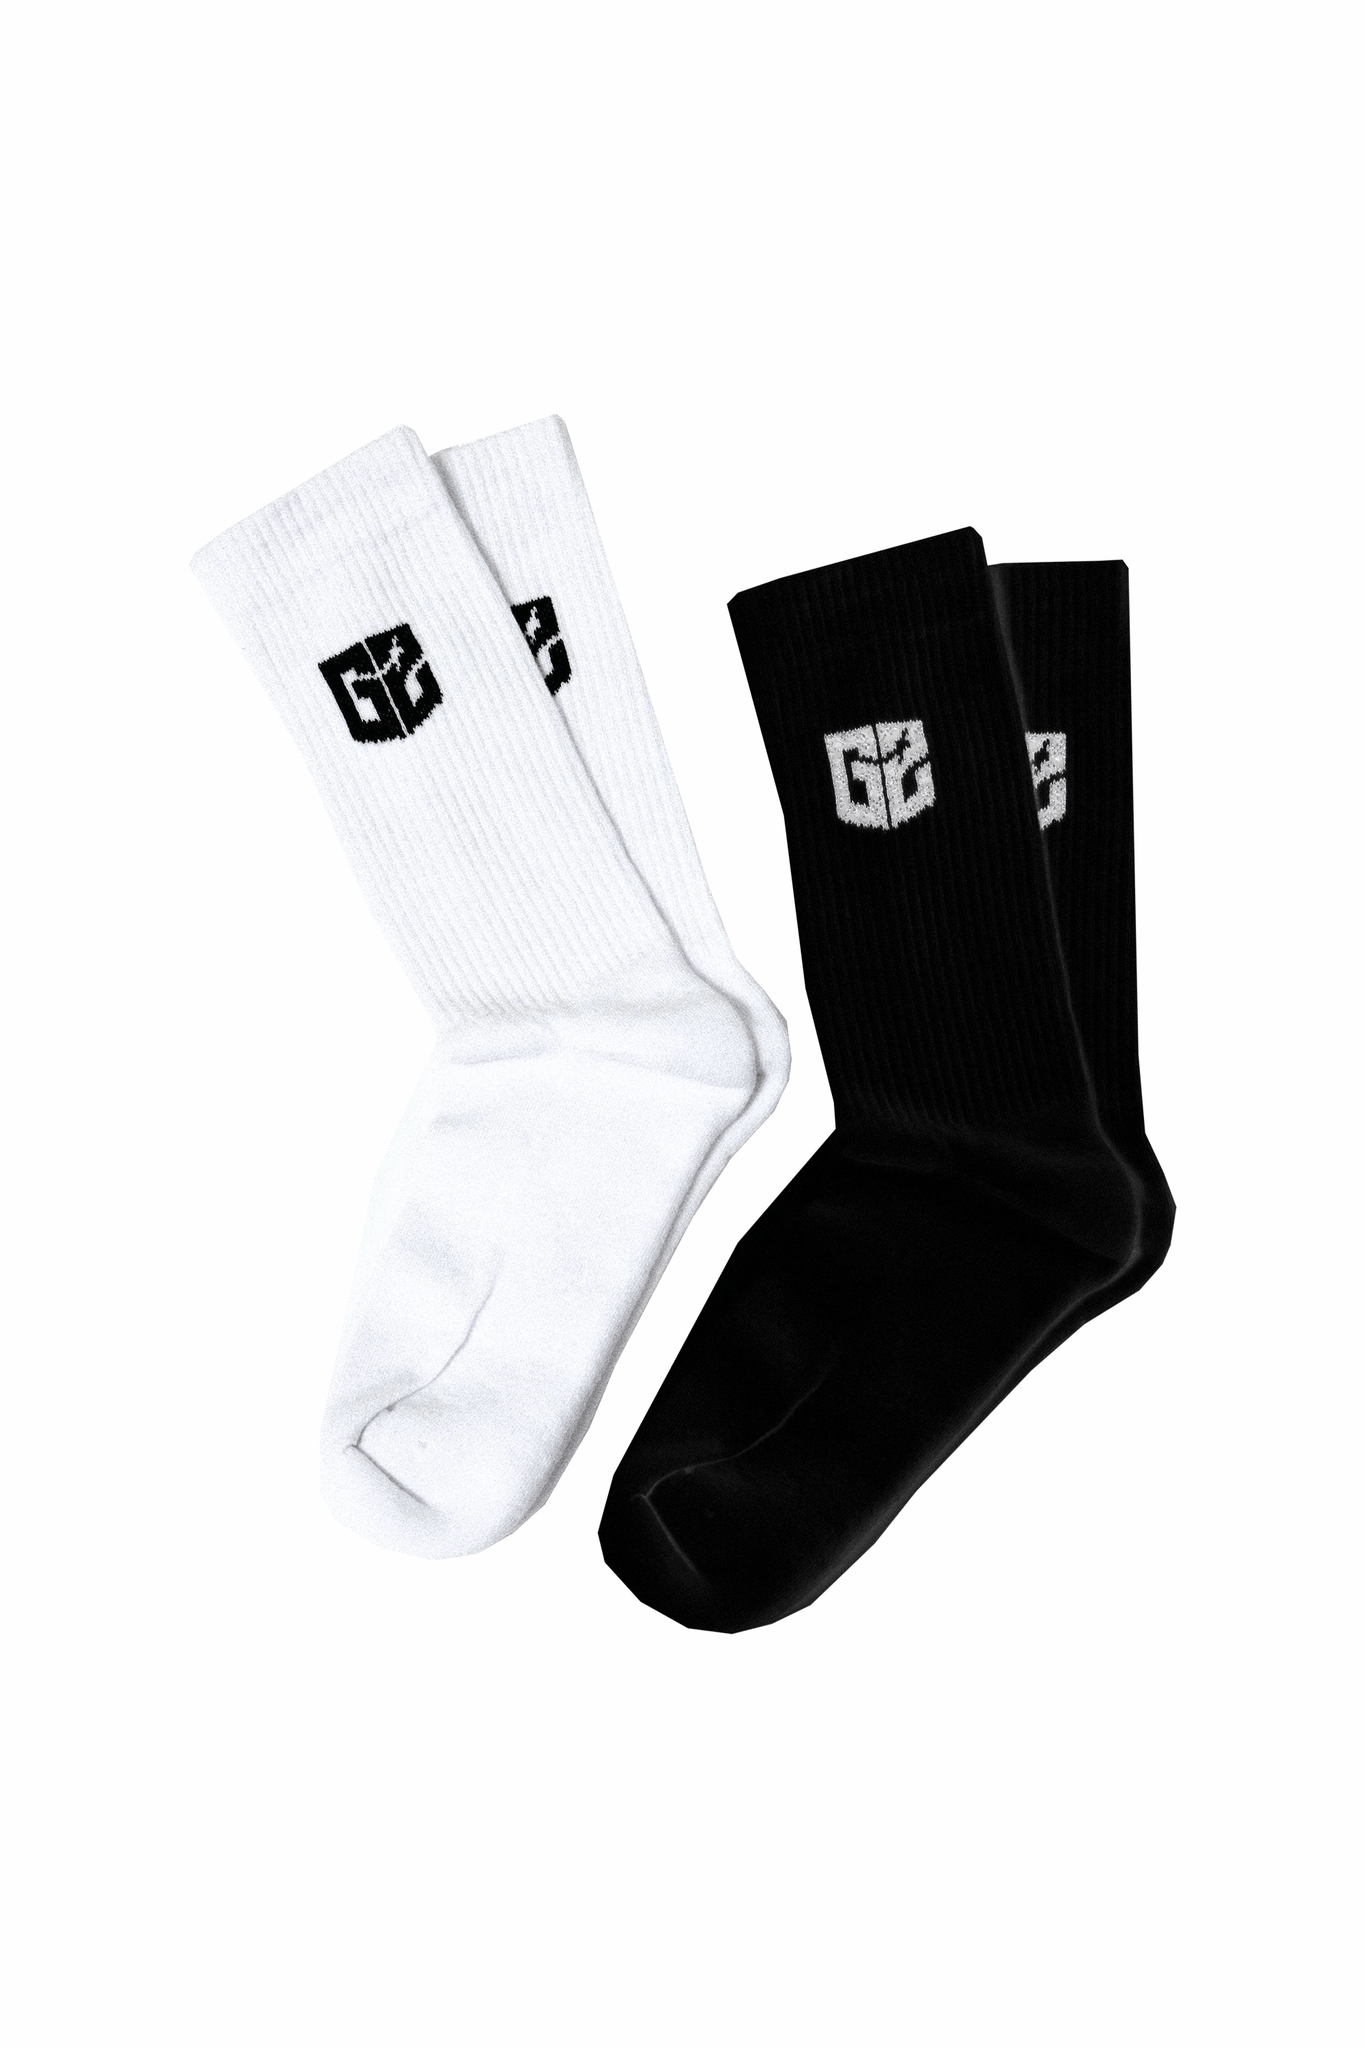 Two-pack of G2 Esports essentials socks in black and white, featuring the G2 logo. Perfect for gamers and fans of the esports team.